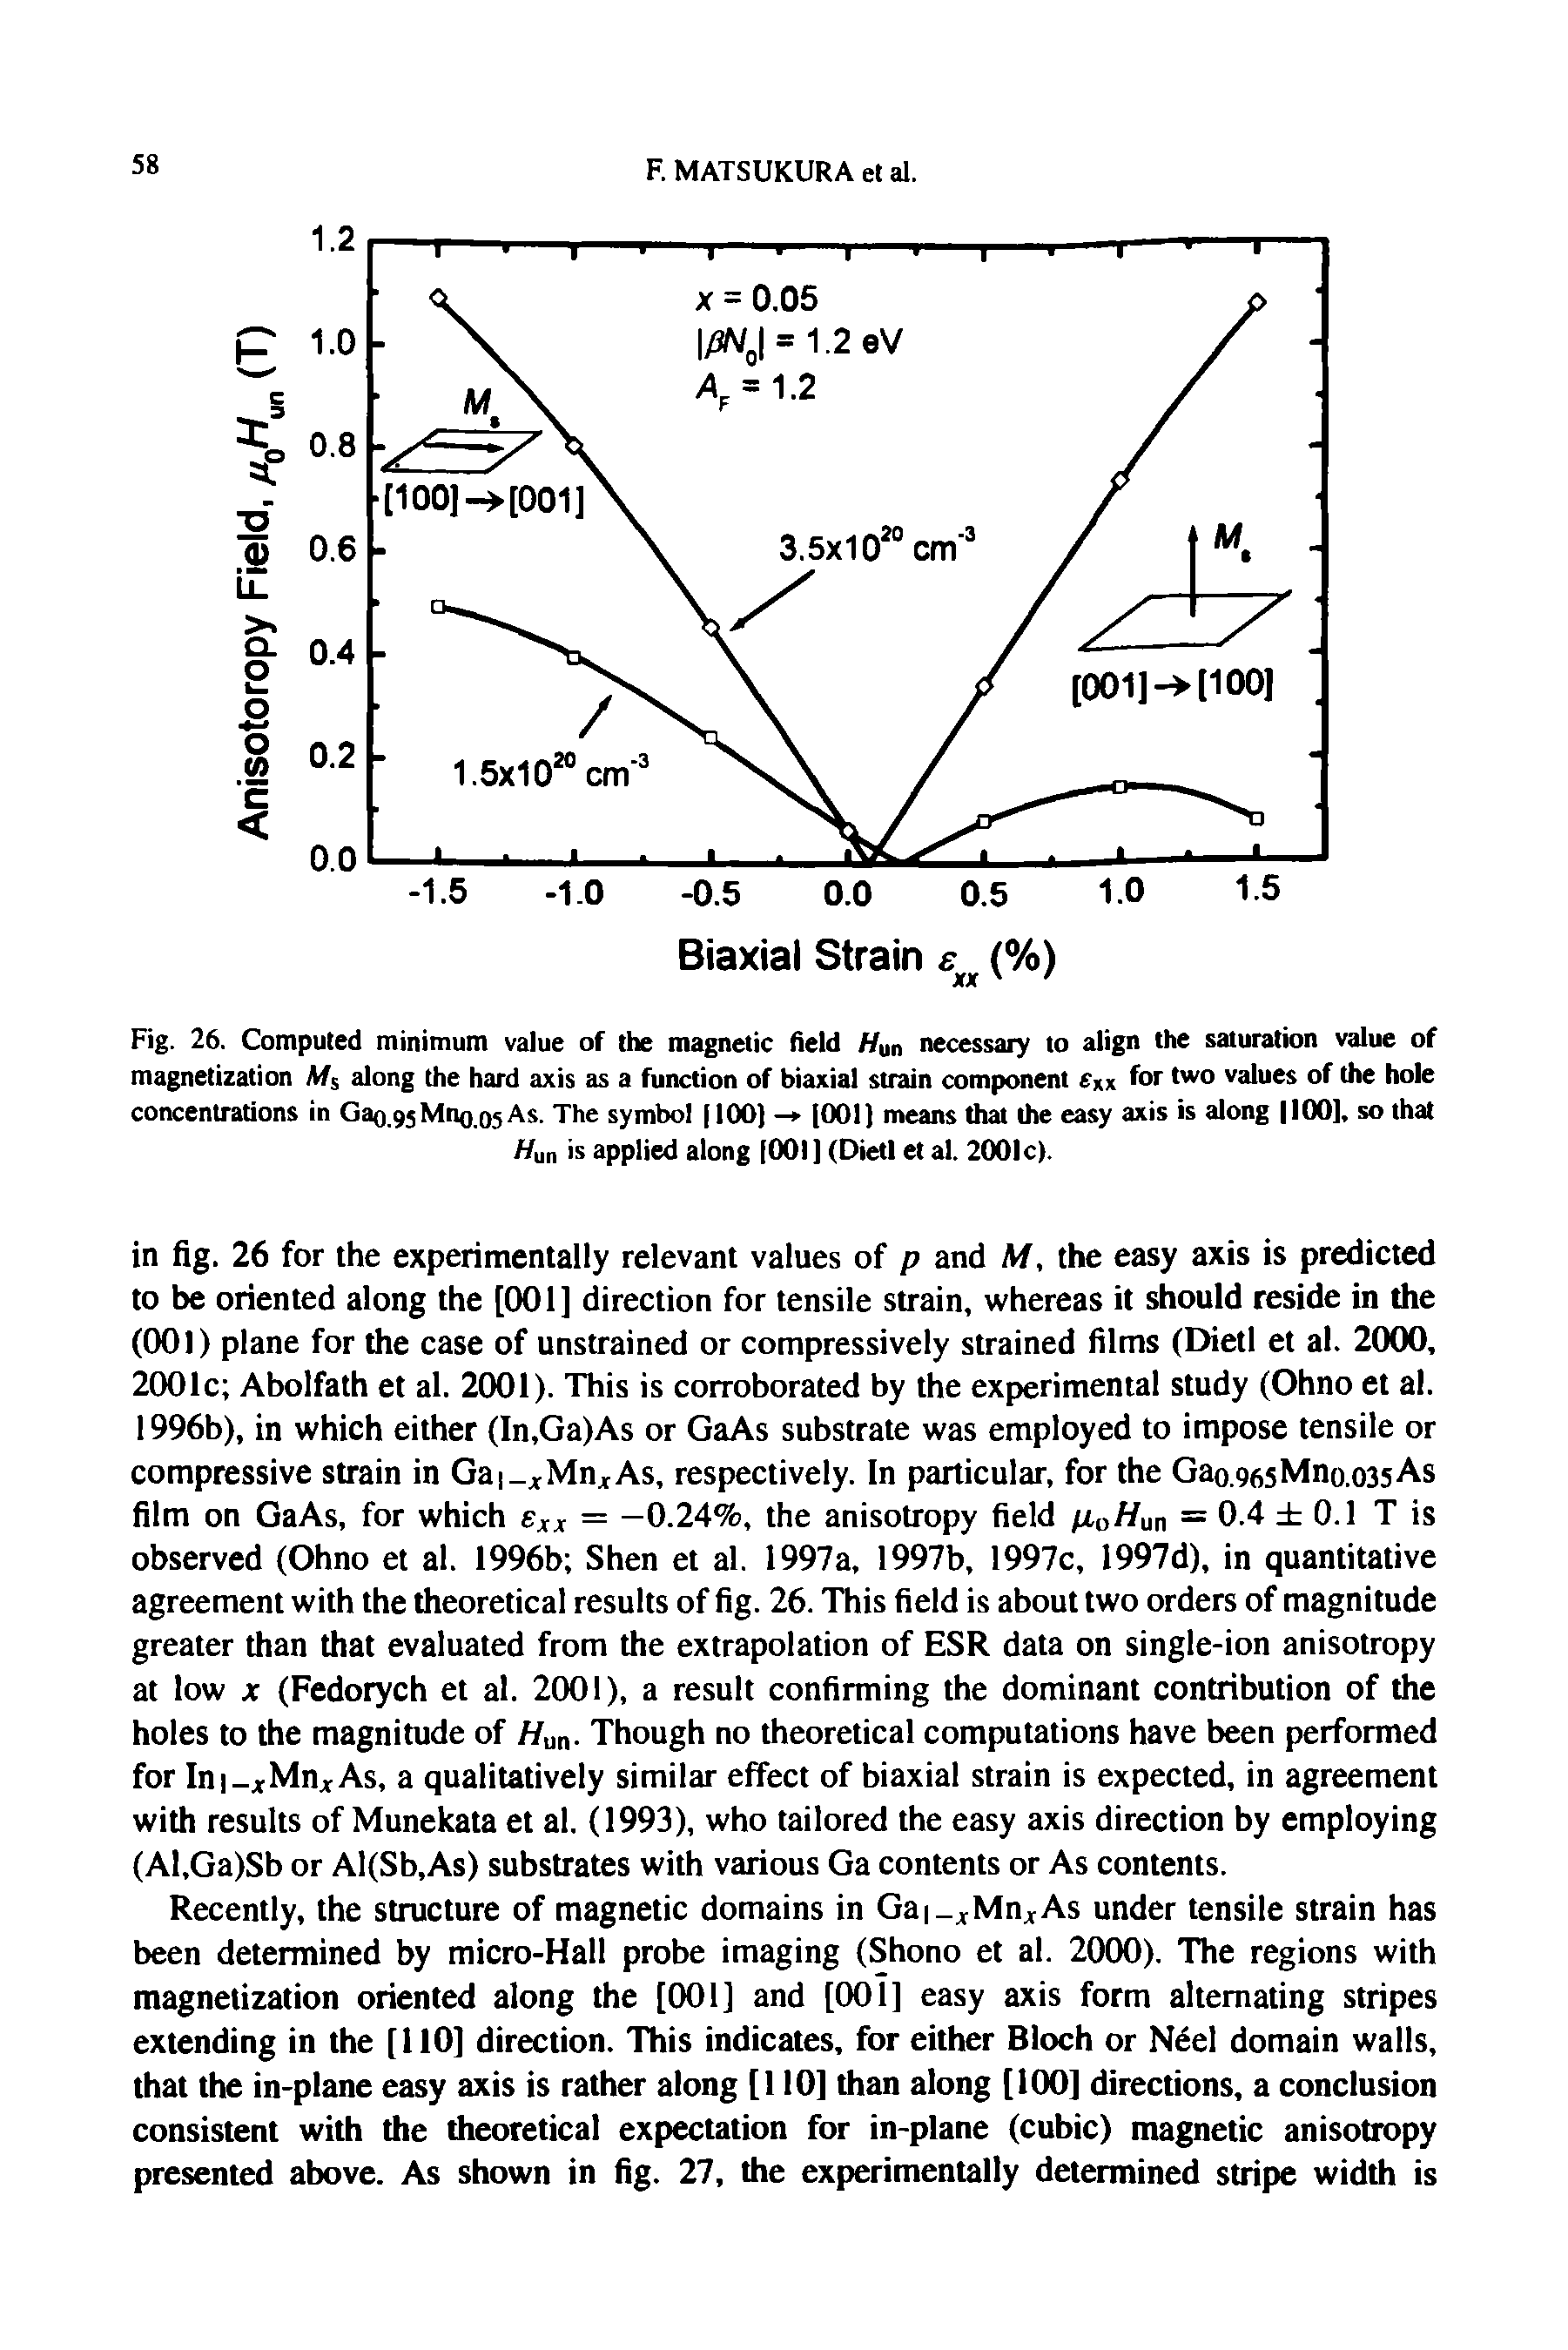 Fig. 26. Computed minimum value of the magnetic field Hm necessary to align the saturation value of magnetization along the hard axis as a function of biaxial strain component for two values of the hole concentrations in Gao.95Mno.05As. The symbol (100) - 1001) means that the easy axis is along IOO], so that Hun is applied along [001] (Dietl et al. 2001c).